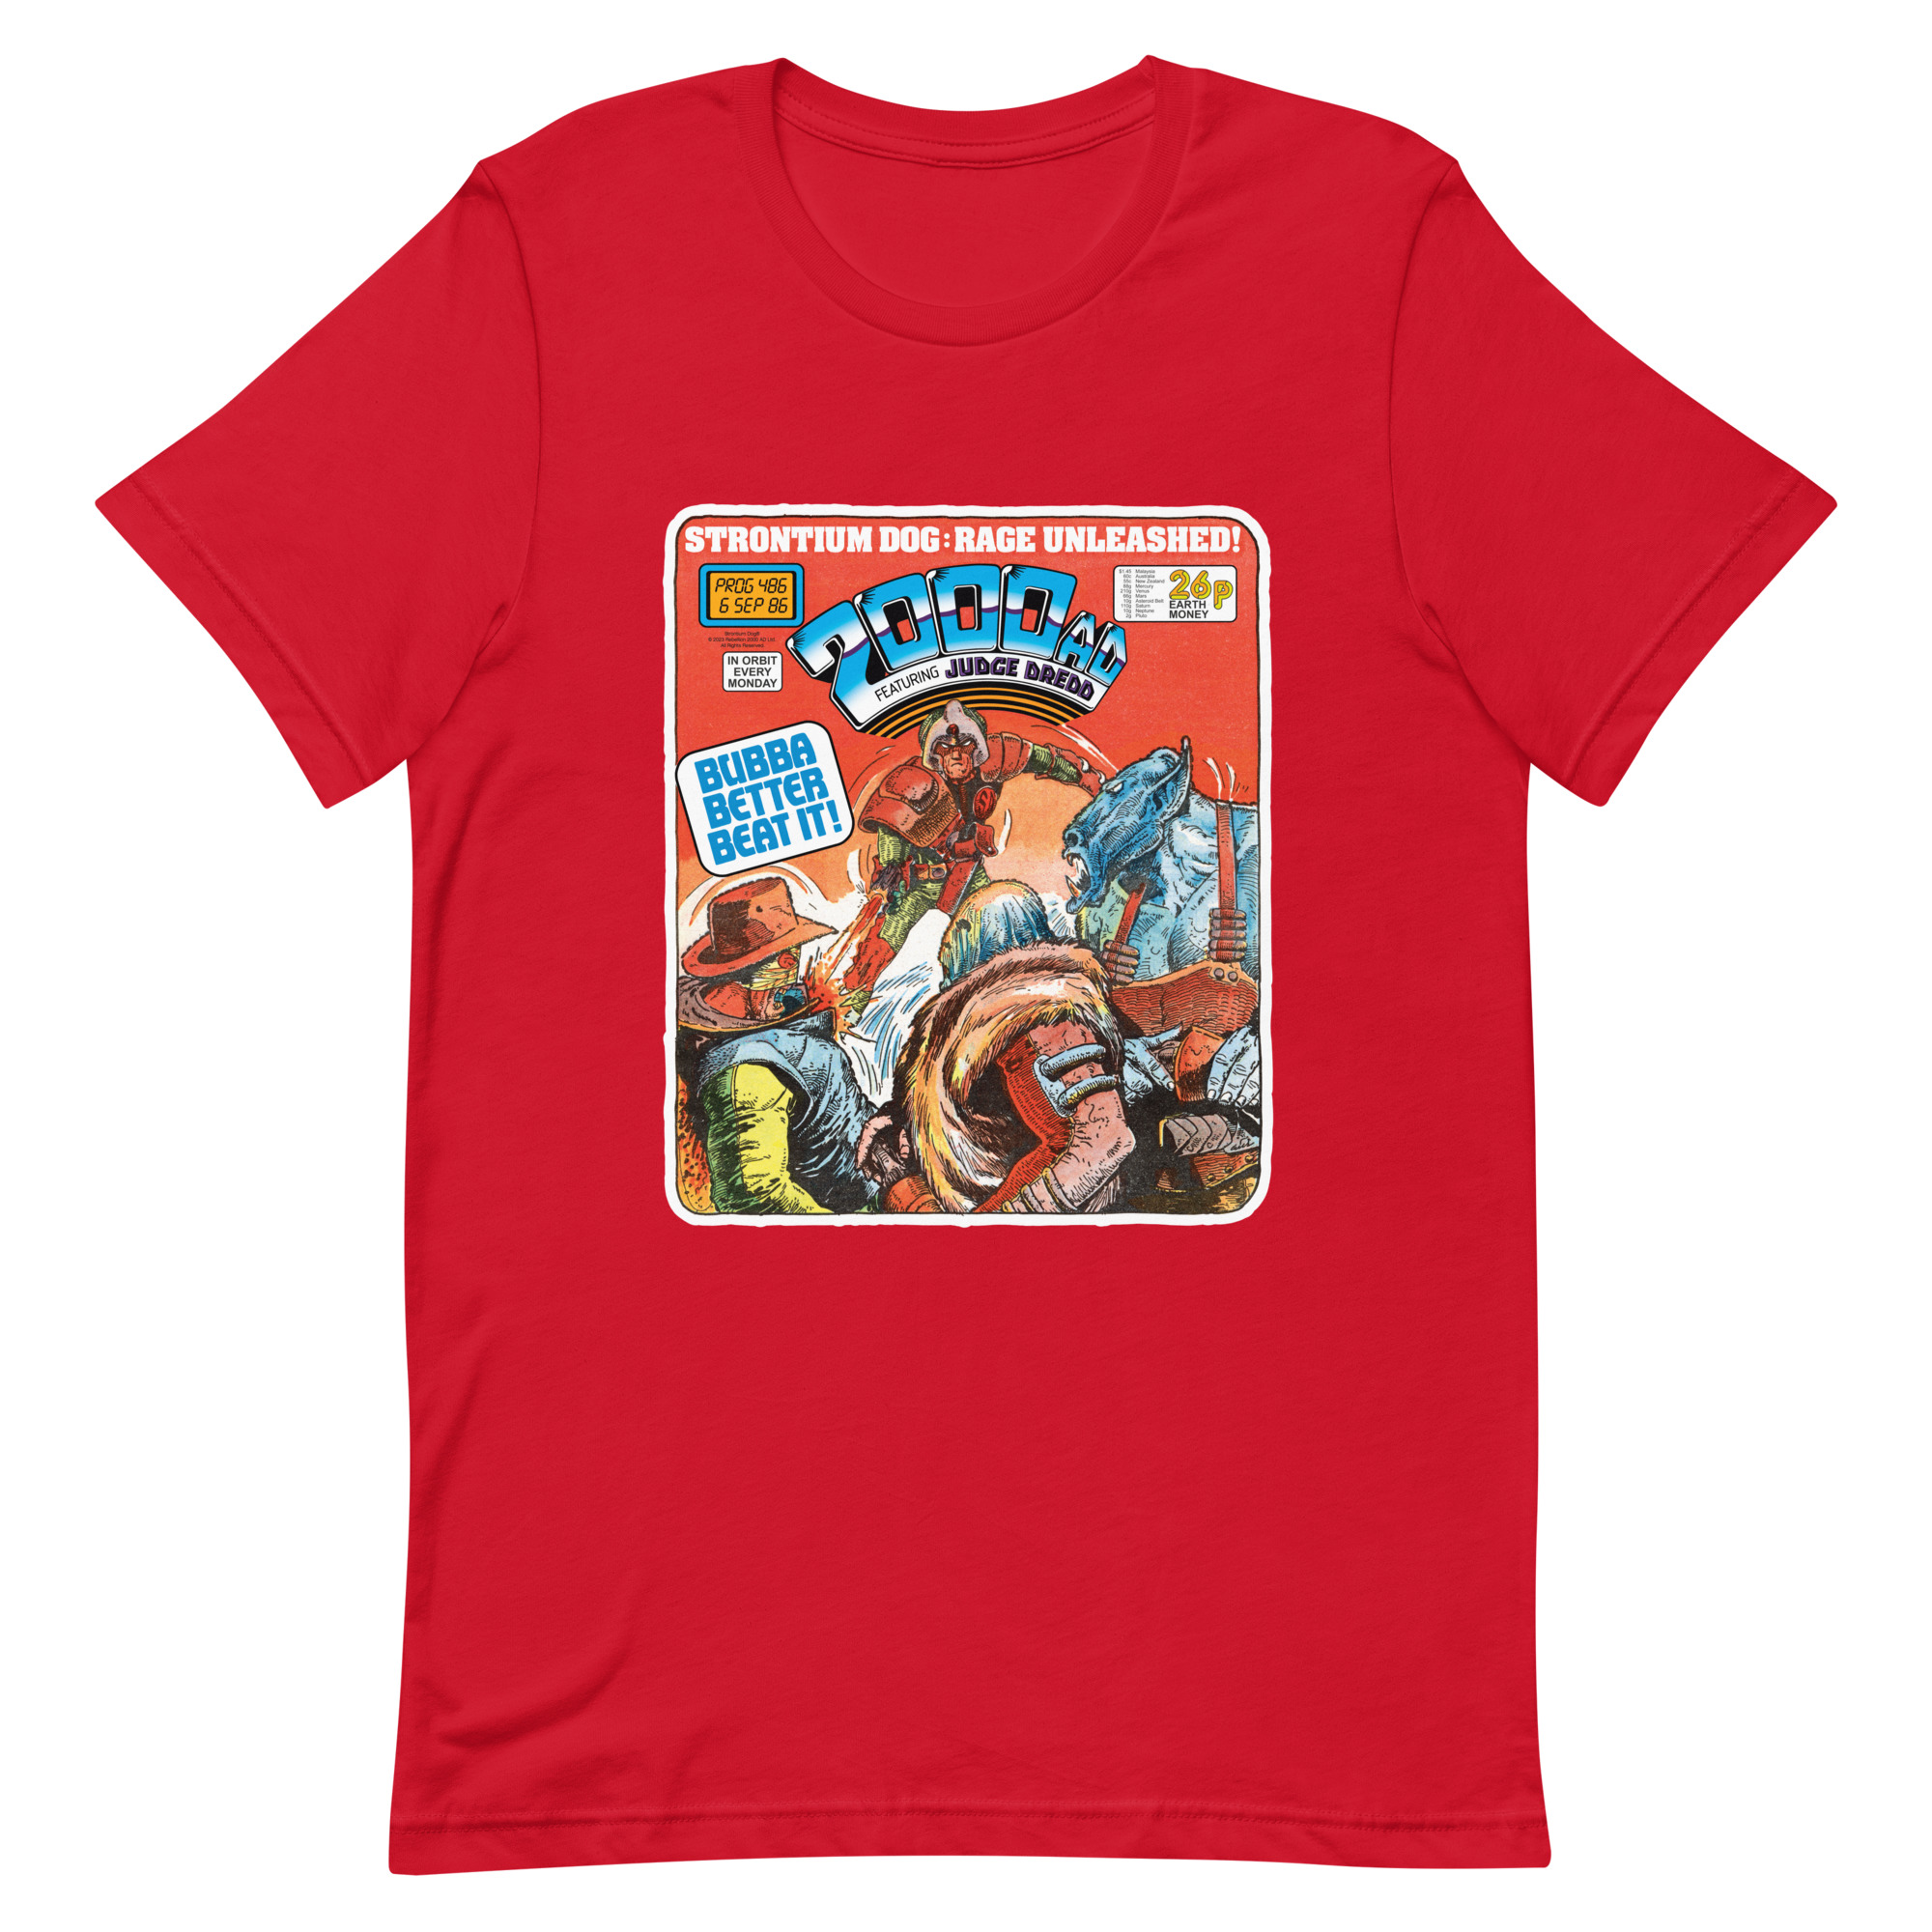 Red Tshirt with a 'Classic' 2000 AD Cover image on the chest. In the image Strontium Dog faces off against three alien ruffians.